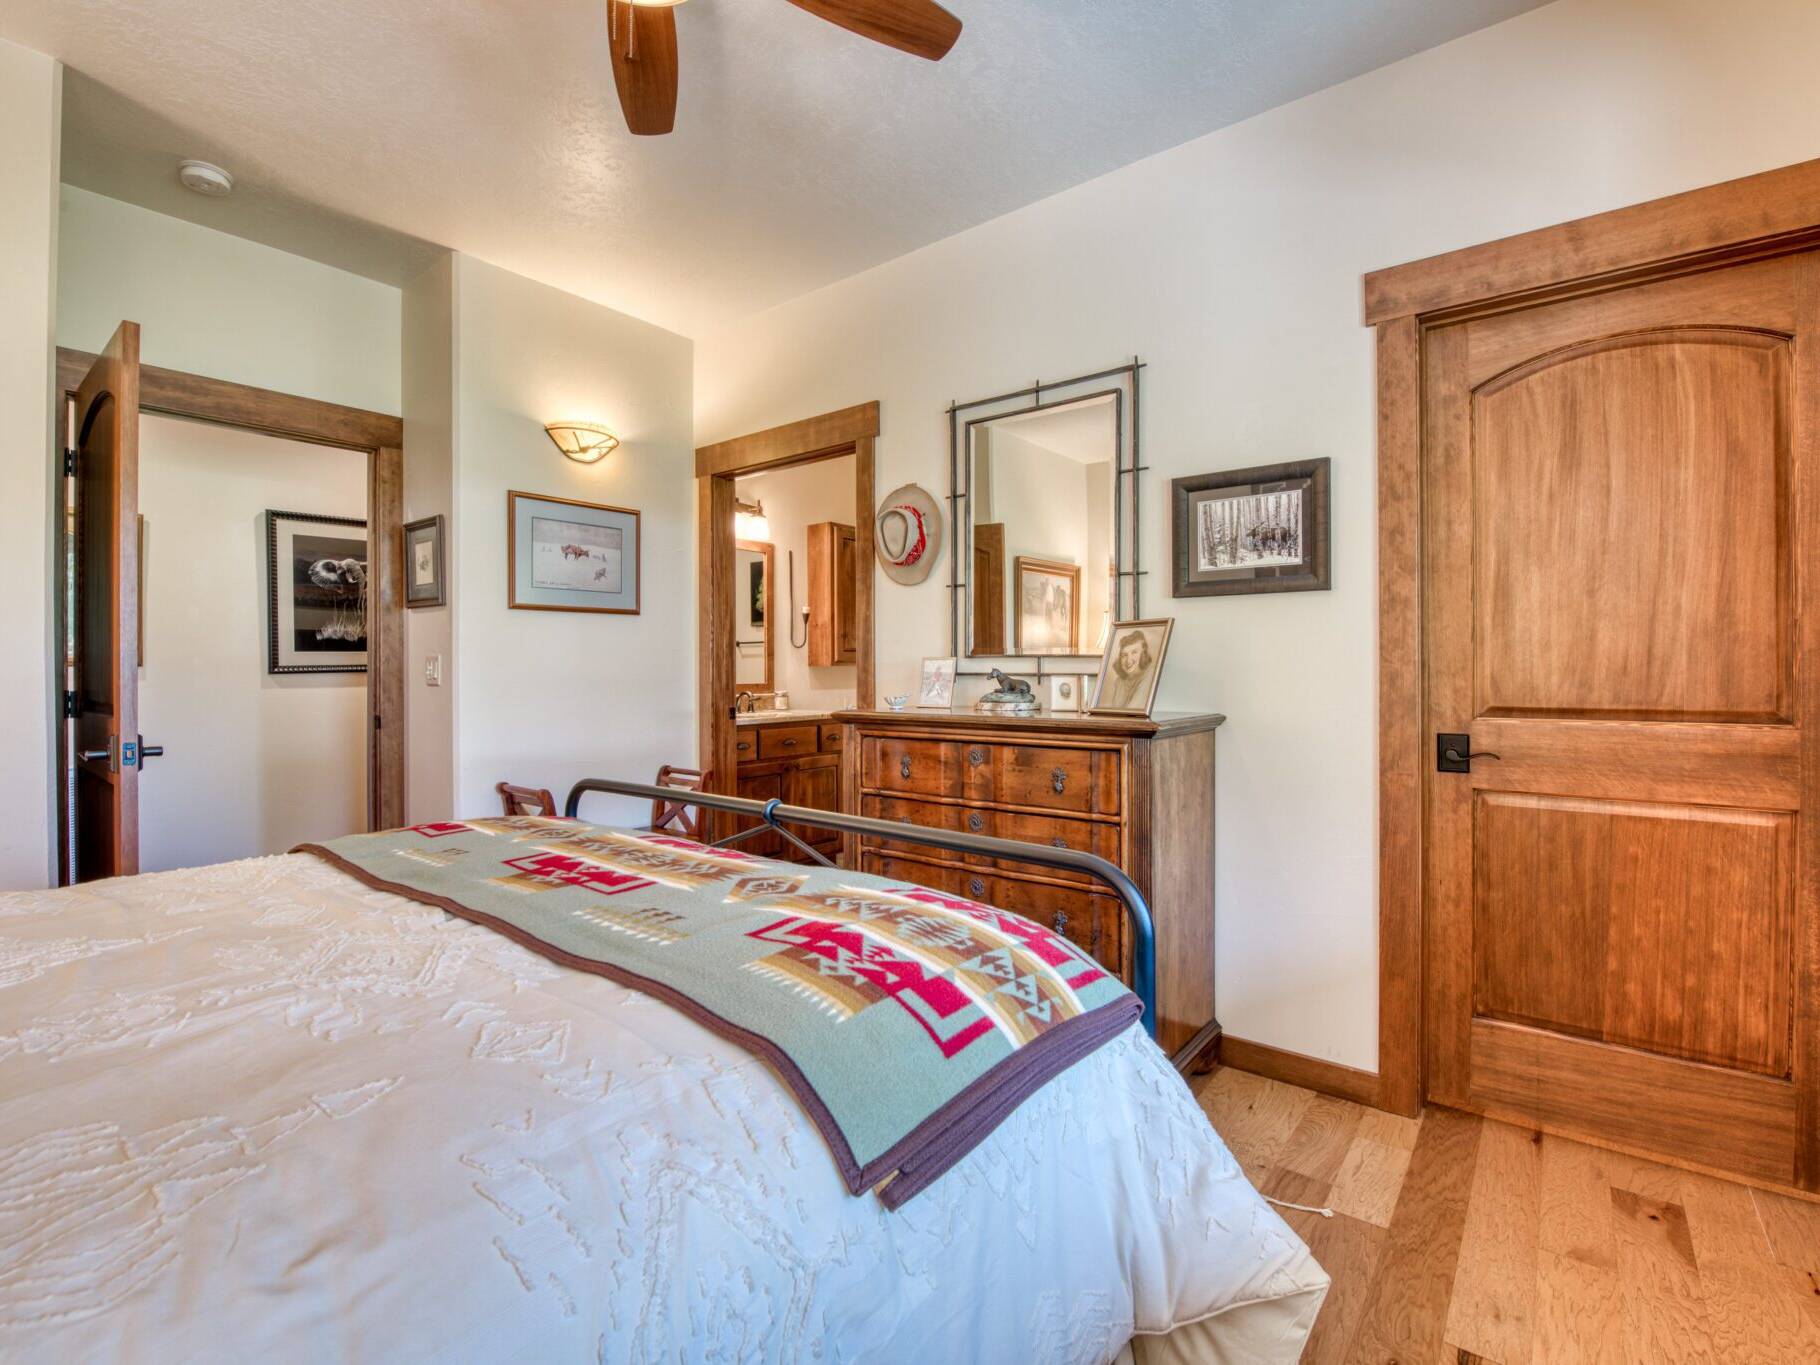 Master bedroom with hardwood floors, and wood trim in a custom home near Hamilton, MT